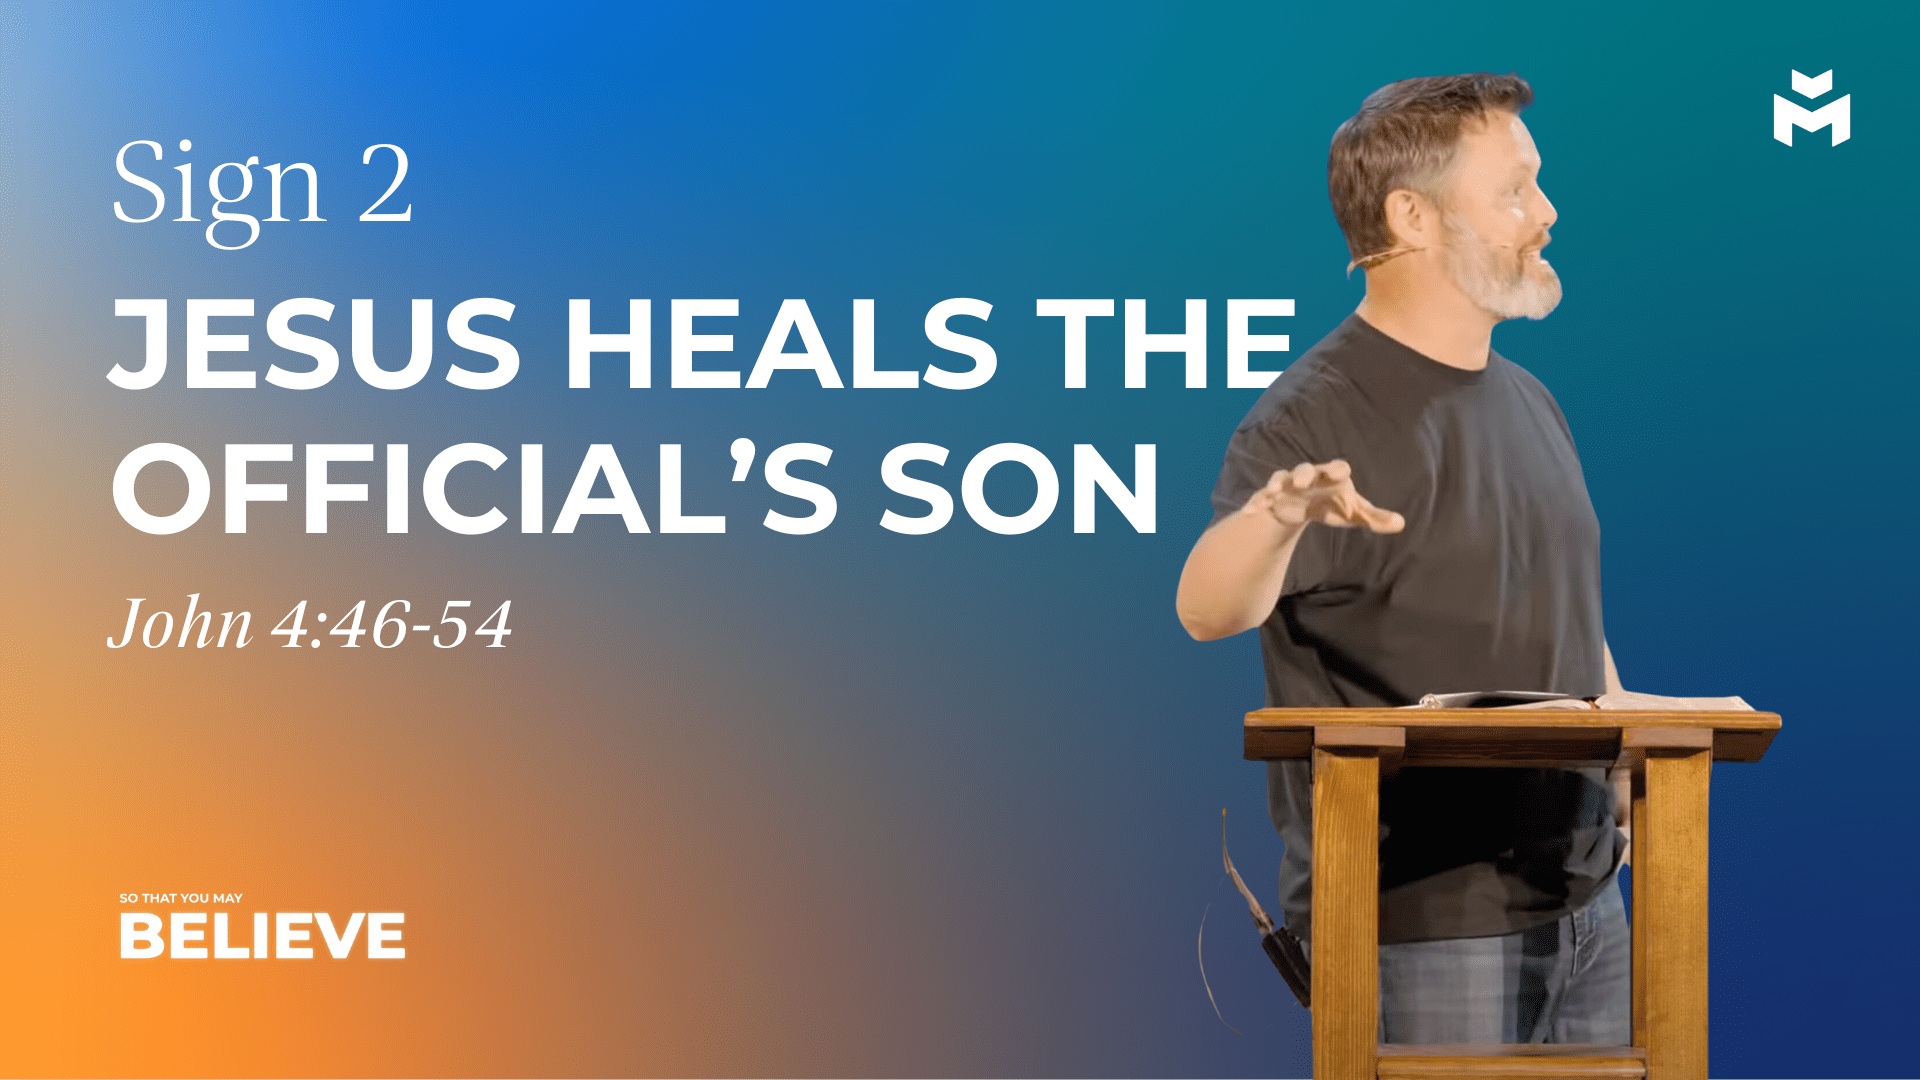 Sign 2: Jesus Heals the Official’s Son